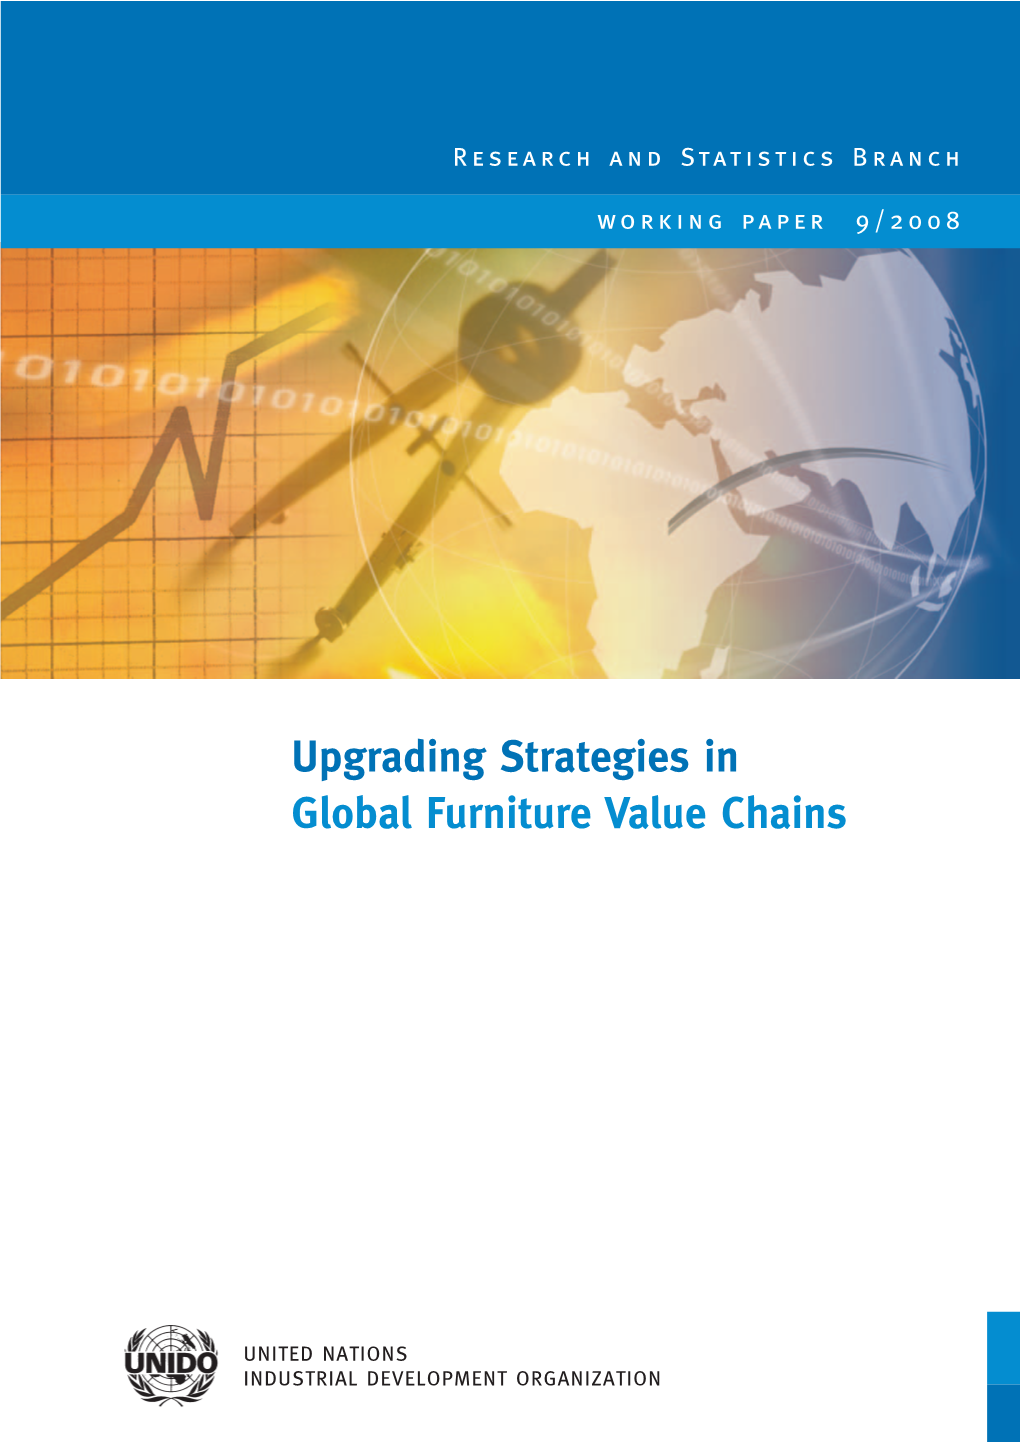 Upgrading Strategies in Global Furniture Value Chains